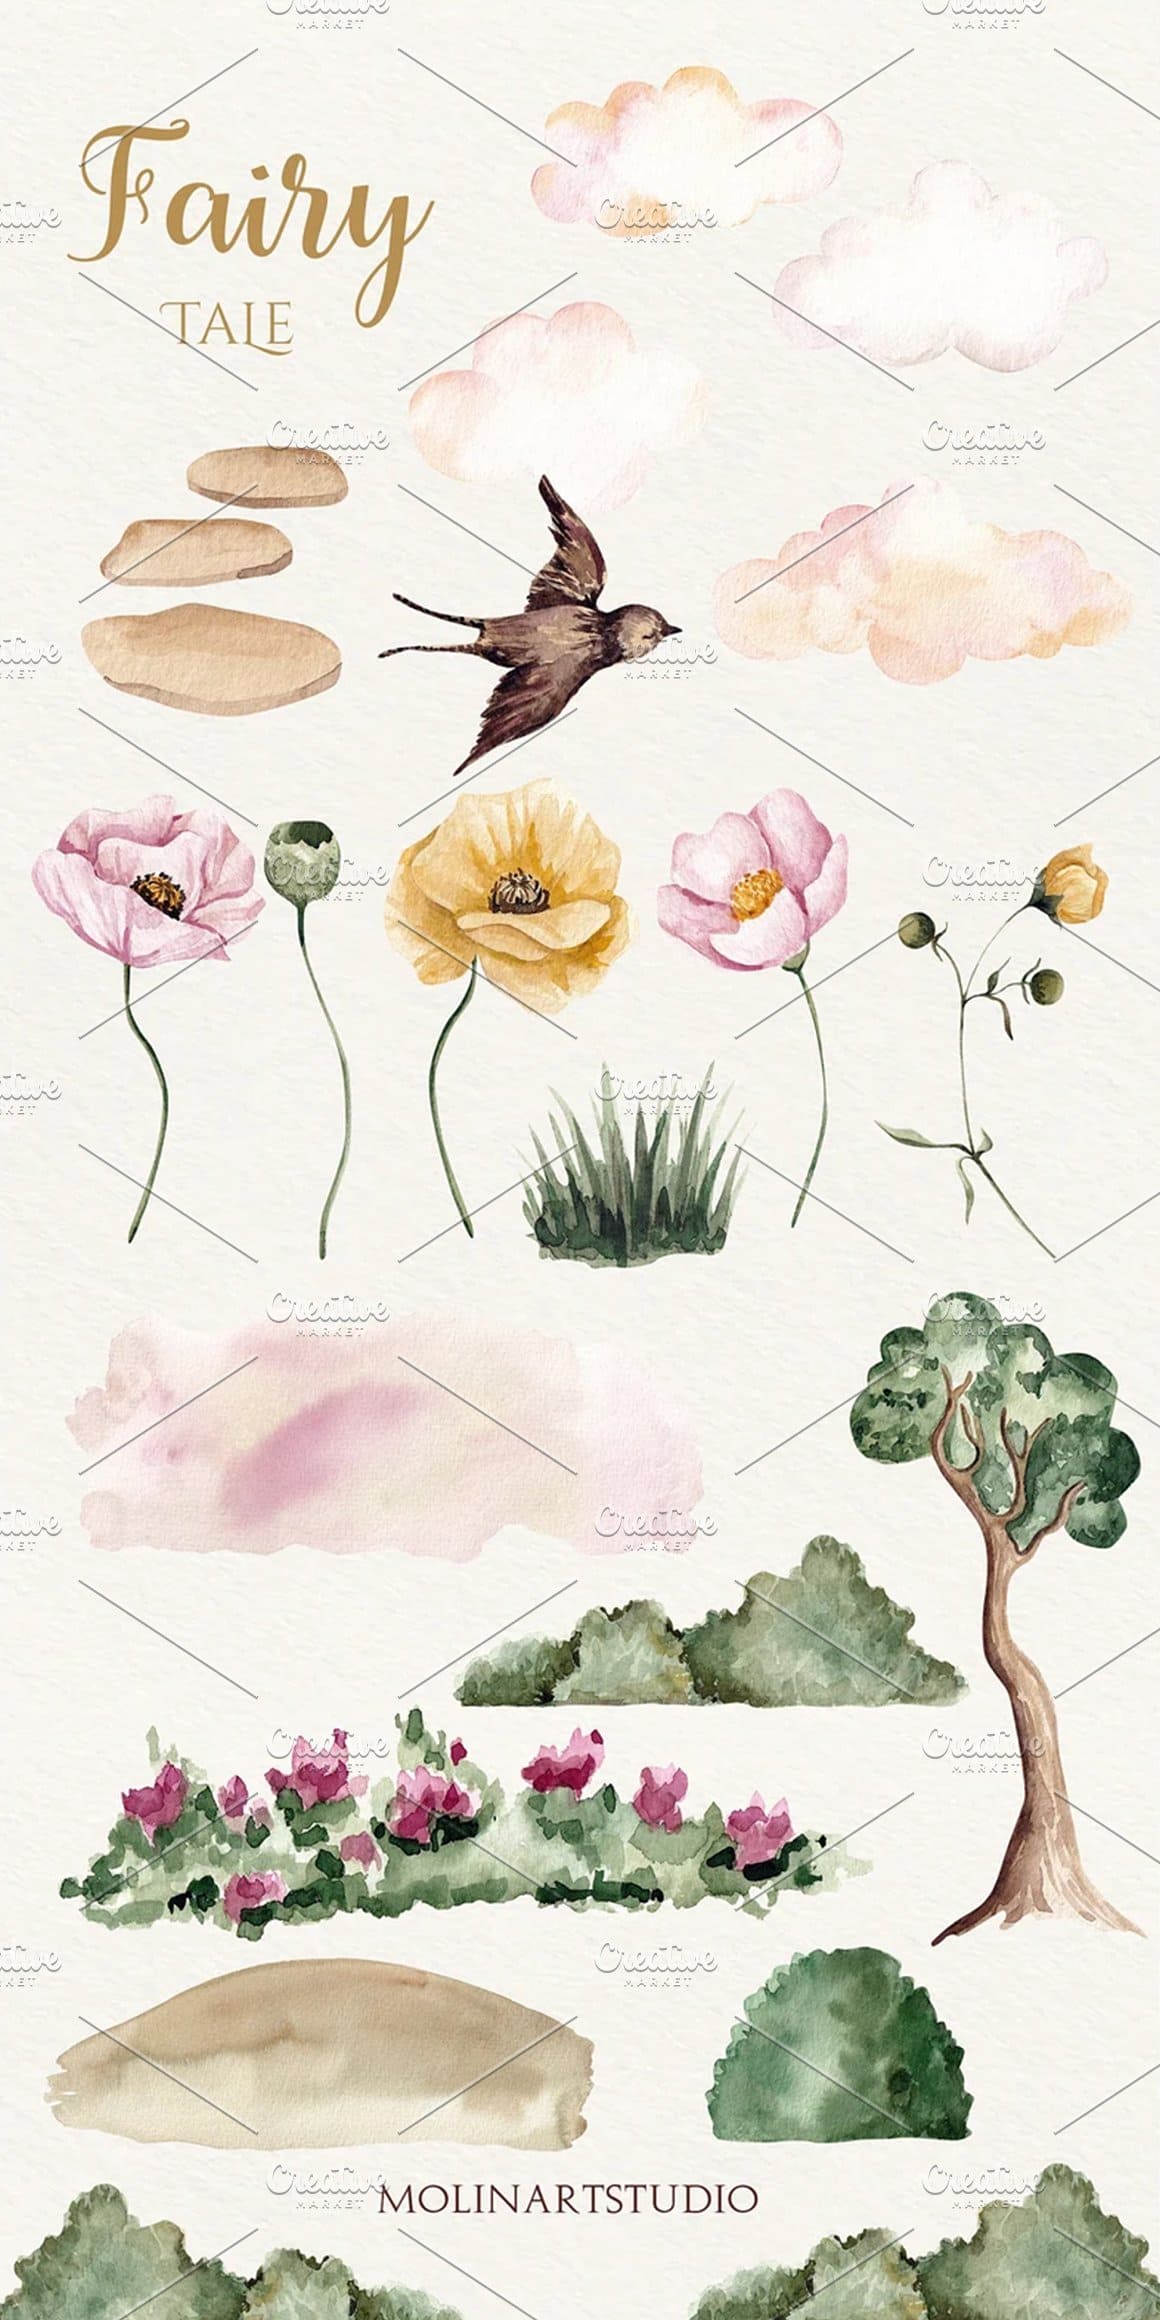 Watercolor image of flowers, trees, birds.